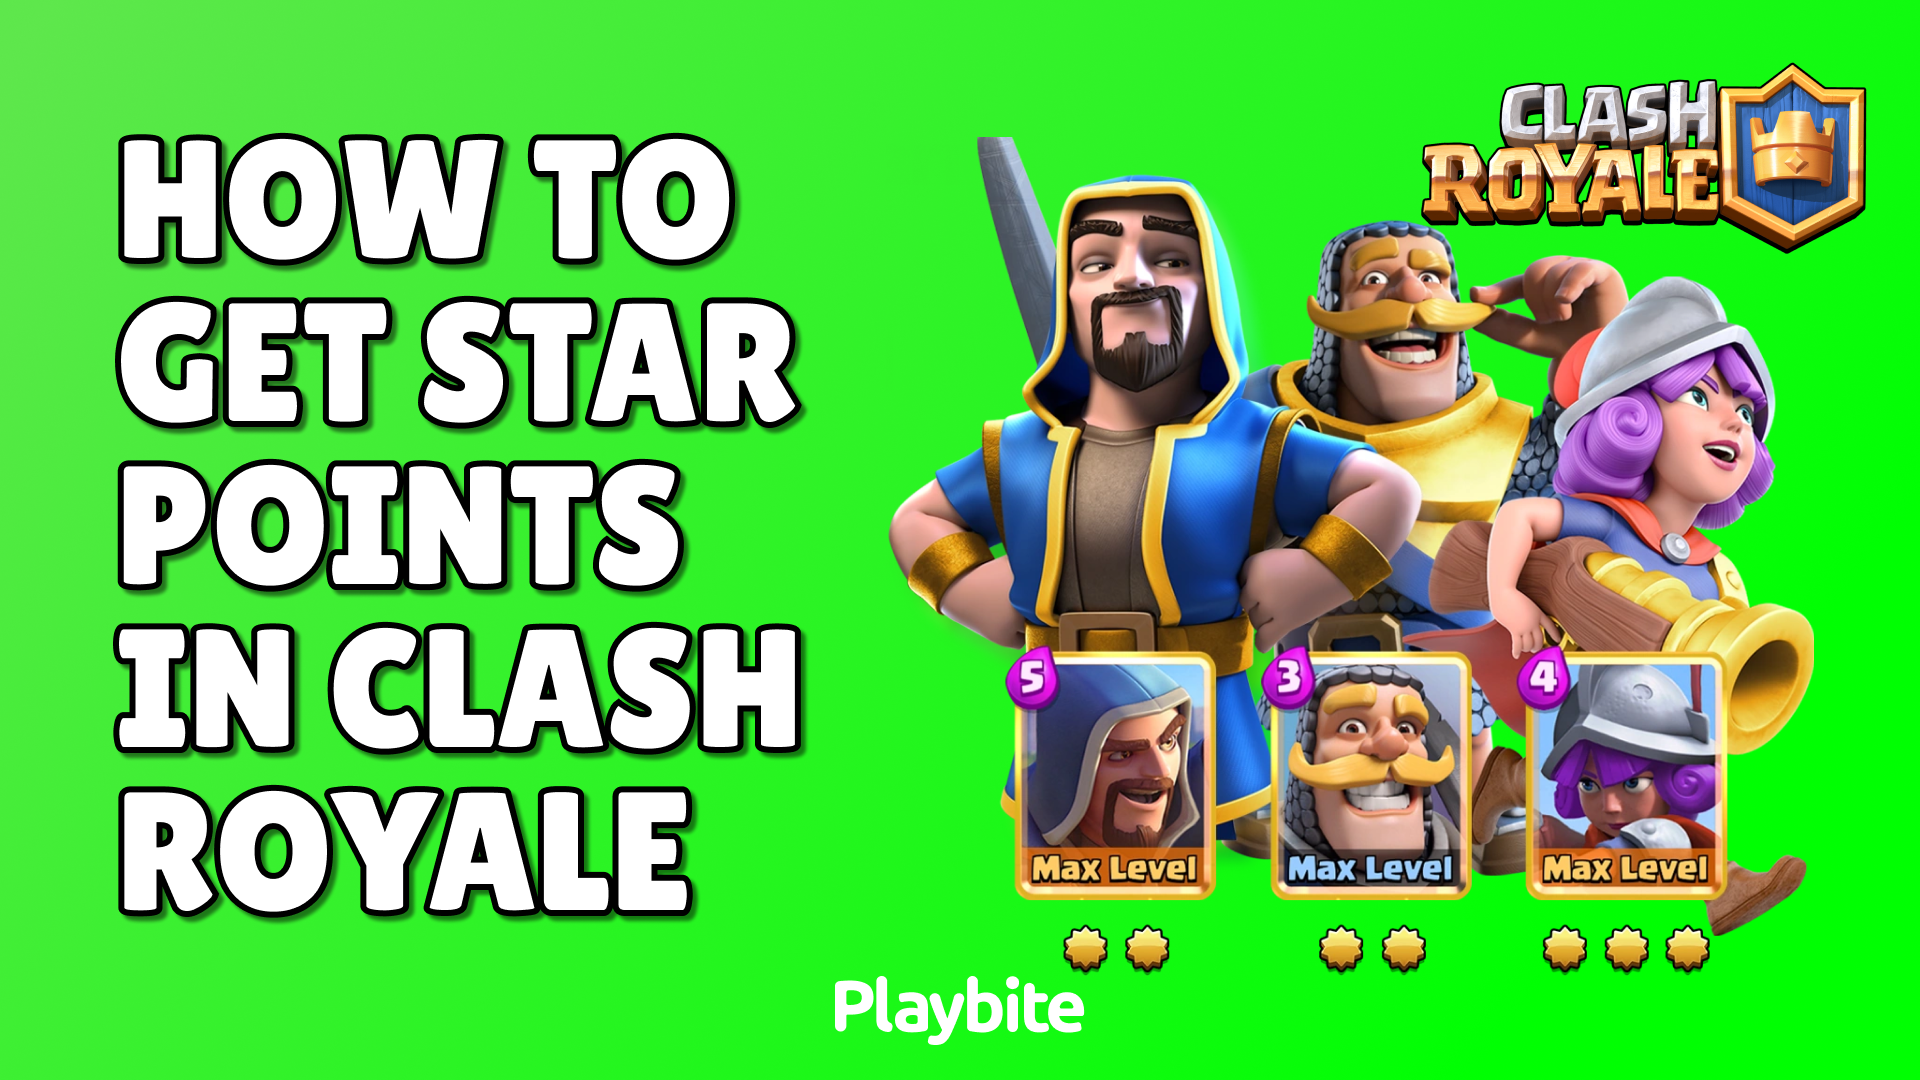 How To Get Star Points In Clash Royale